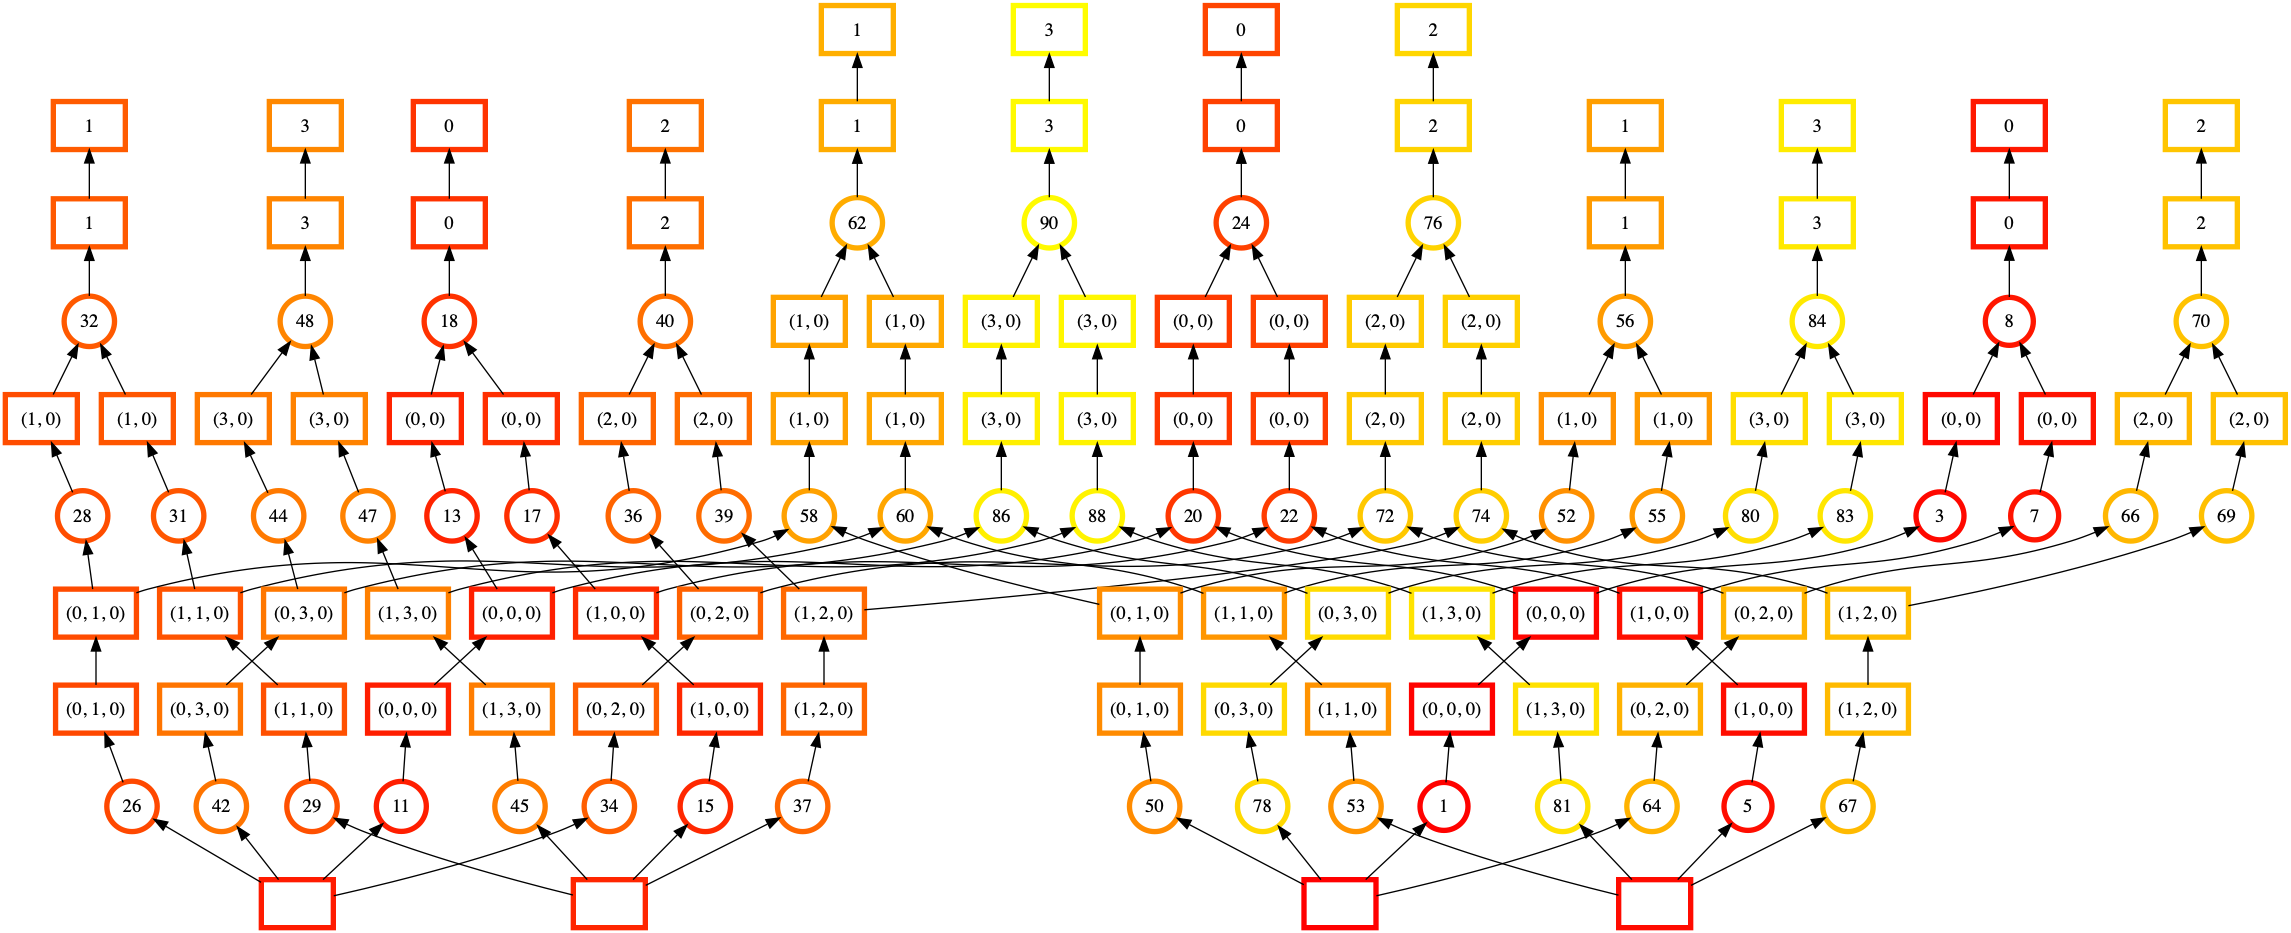 Complex task graph of several vertical node chains at the output, and a few input sub-trees. In between these sections, there is a many-to-many area of crossing dependency arrows. The color coding of the output trees is interleaved without a clear progression.